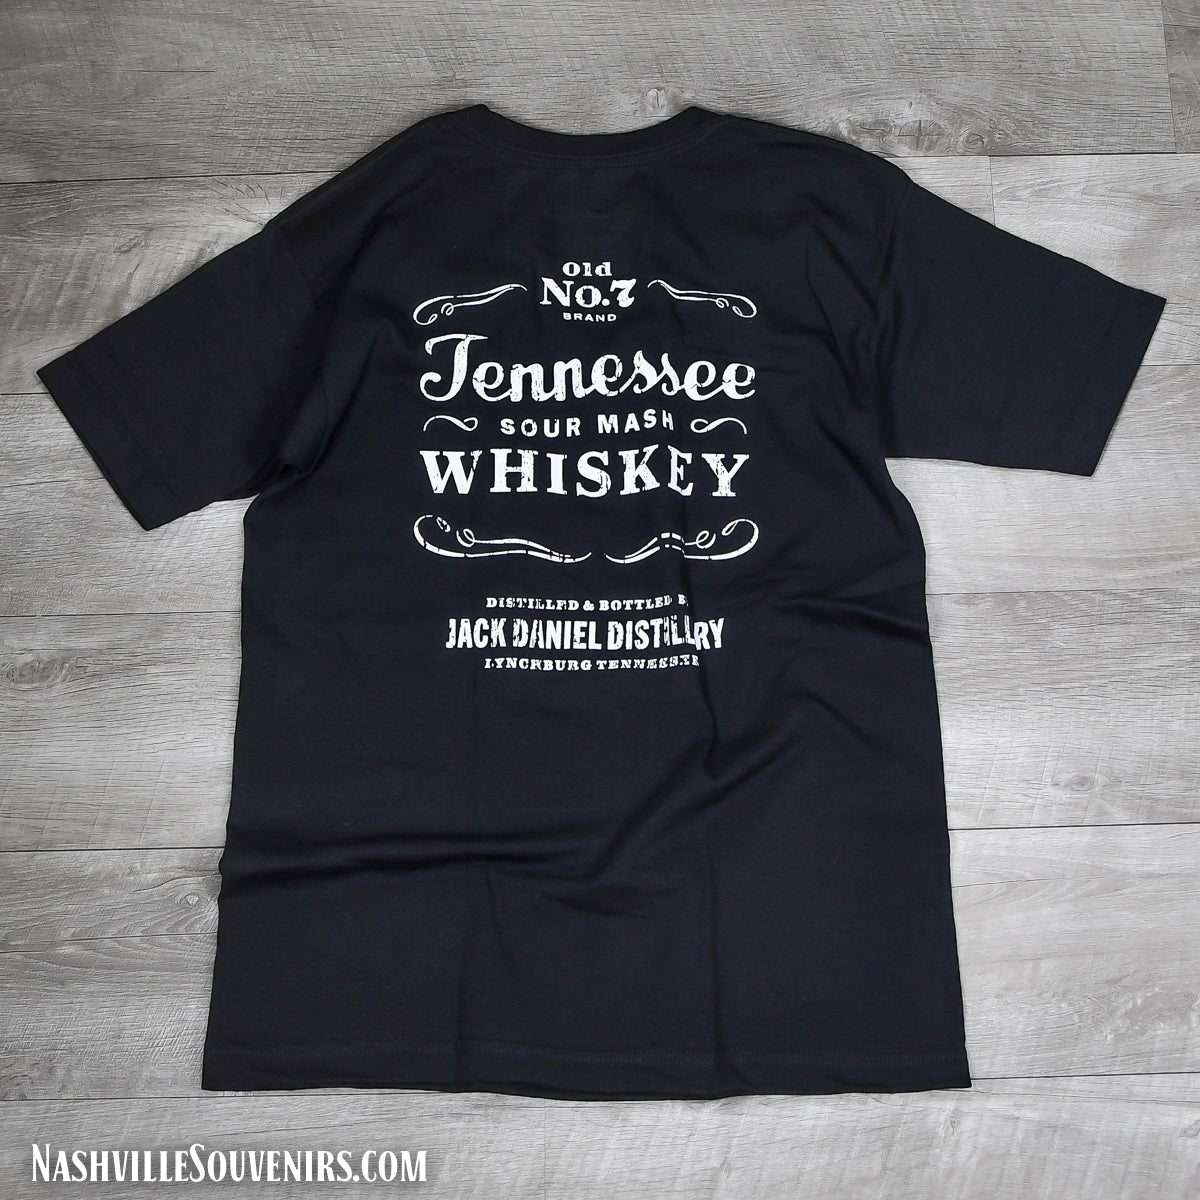 Officially licensed Jack Daniels Sour Mash Whiskey T-shirt. The back of the shirt has a large Old No. 7 Tennessee Sour Mash Whiskey logo. FREE SHIPPING on all US orders over $75!